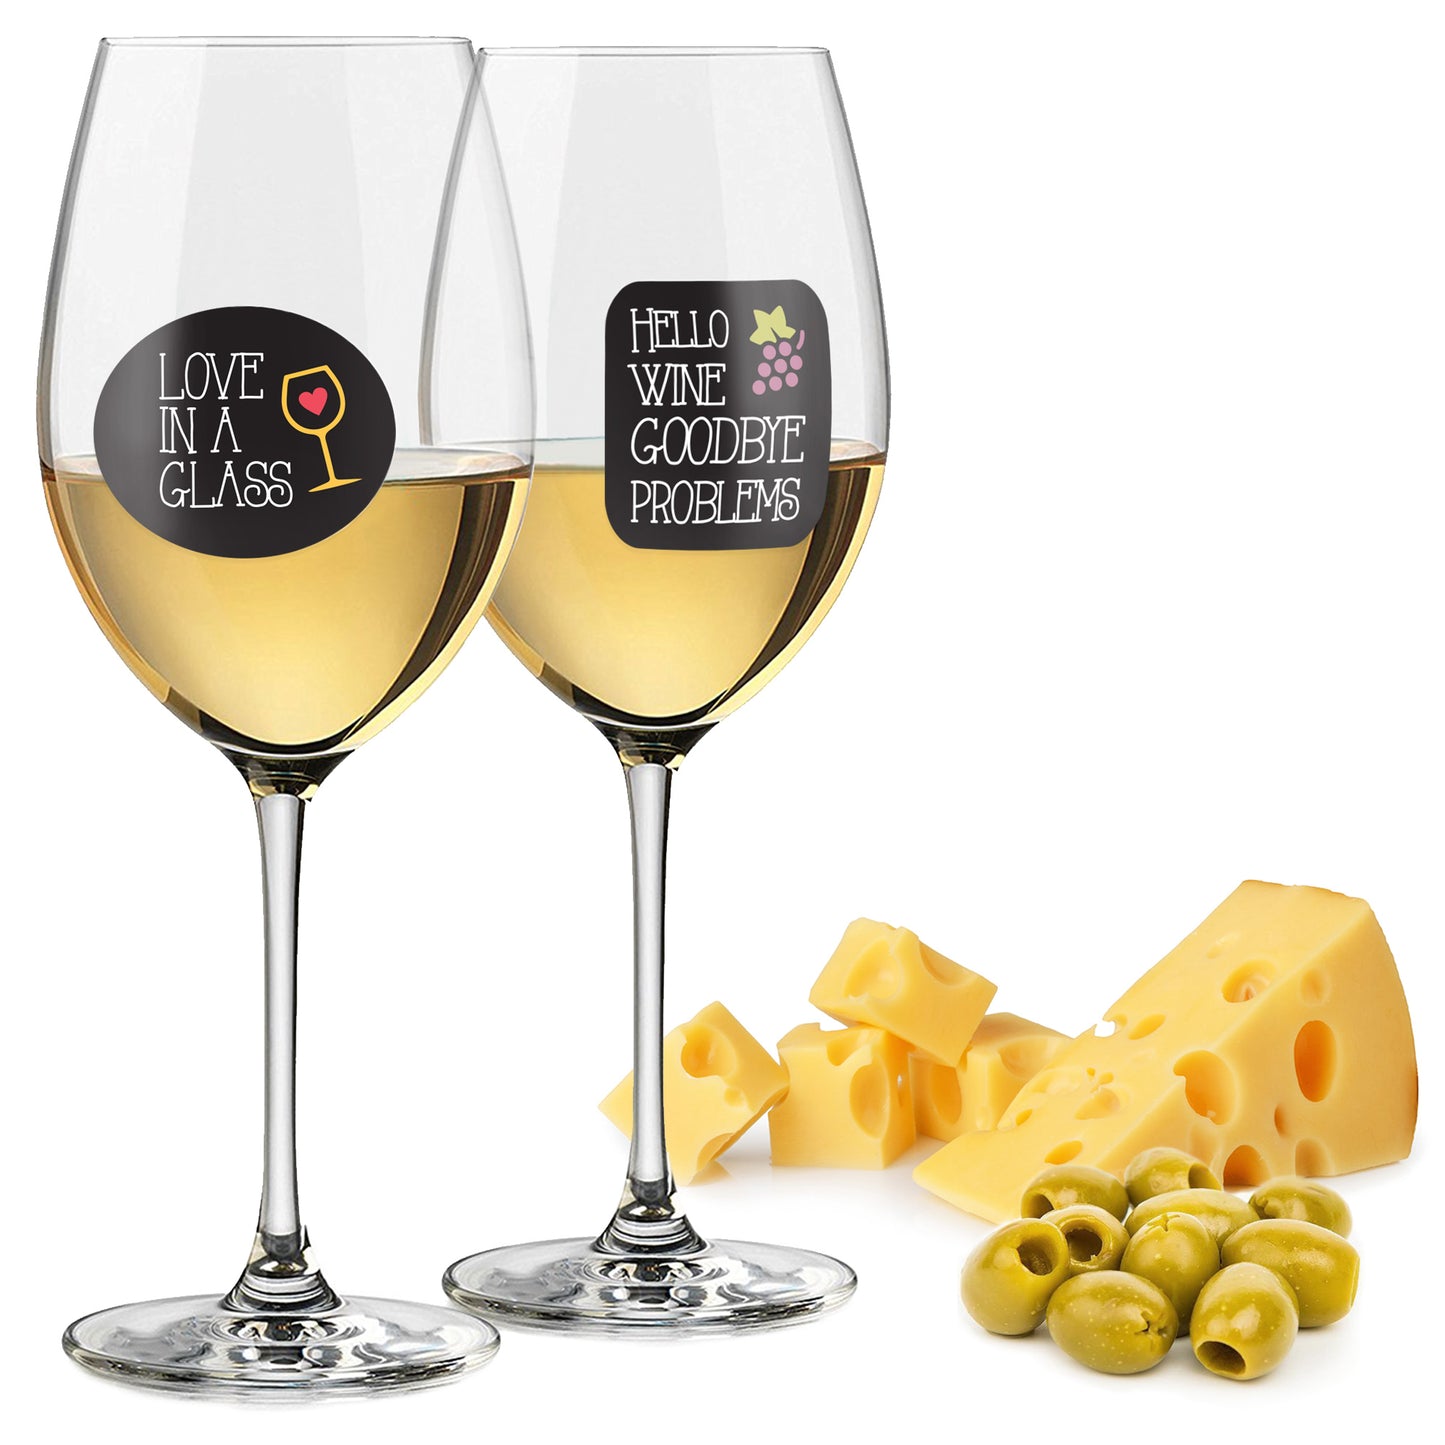 WINE THEMED STICKERS - Enjoy Your Sips From Funny Decorated Glasses